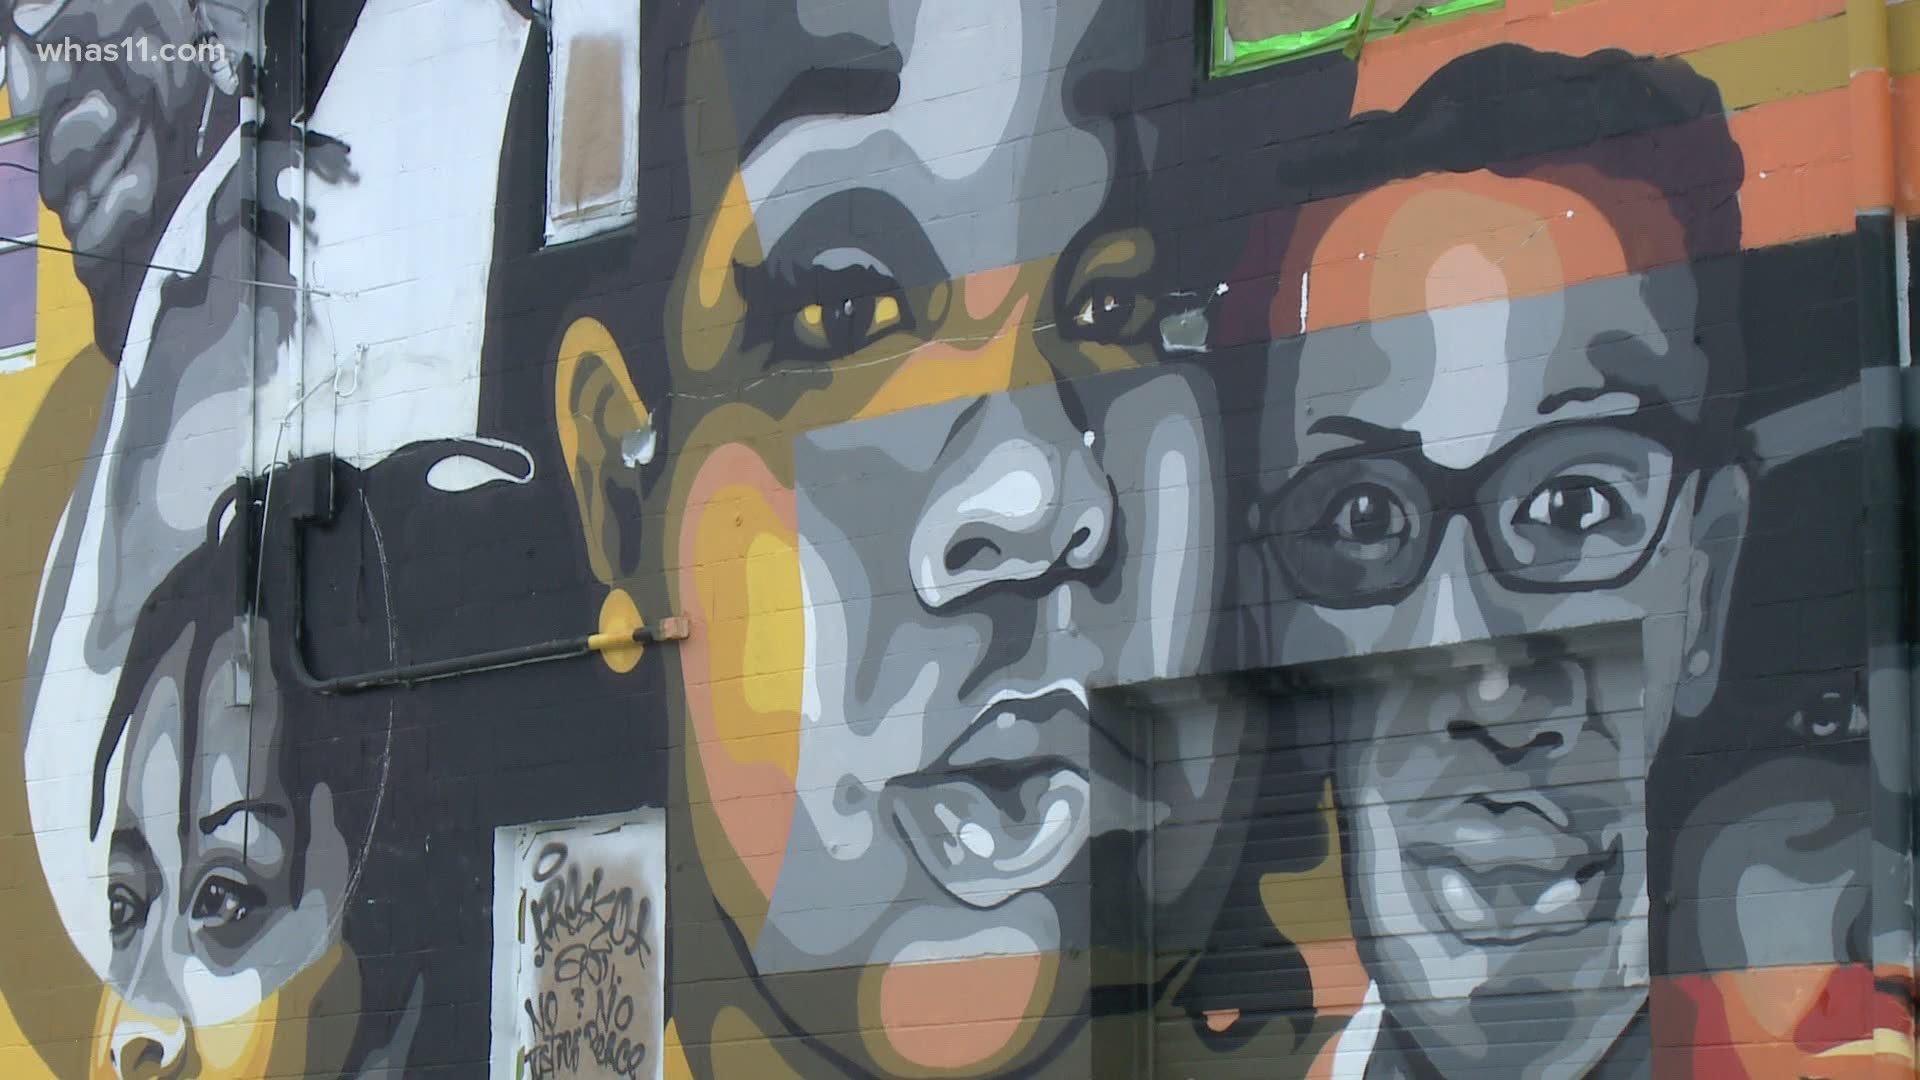 A new mural on west main street pays tribute to some of the lives lost in the social justice movement.